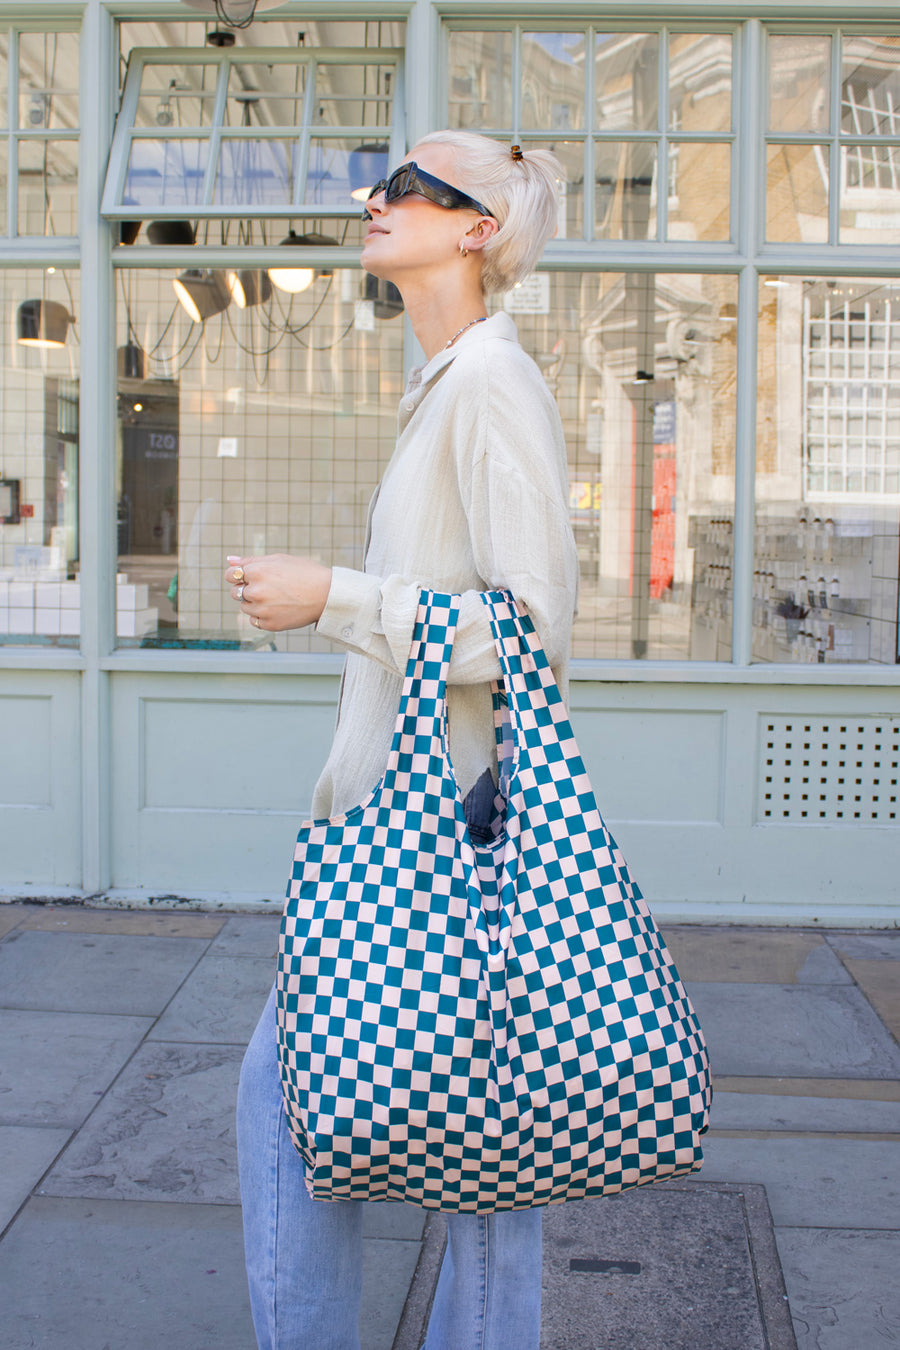 Checkerboard Teal & Beige | Extra Large Reusable Bag